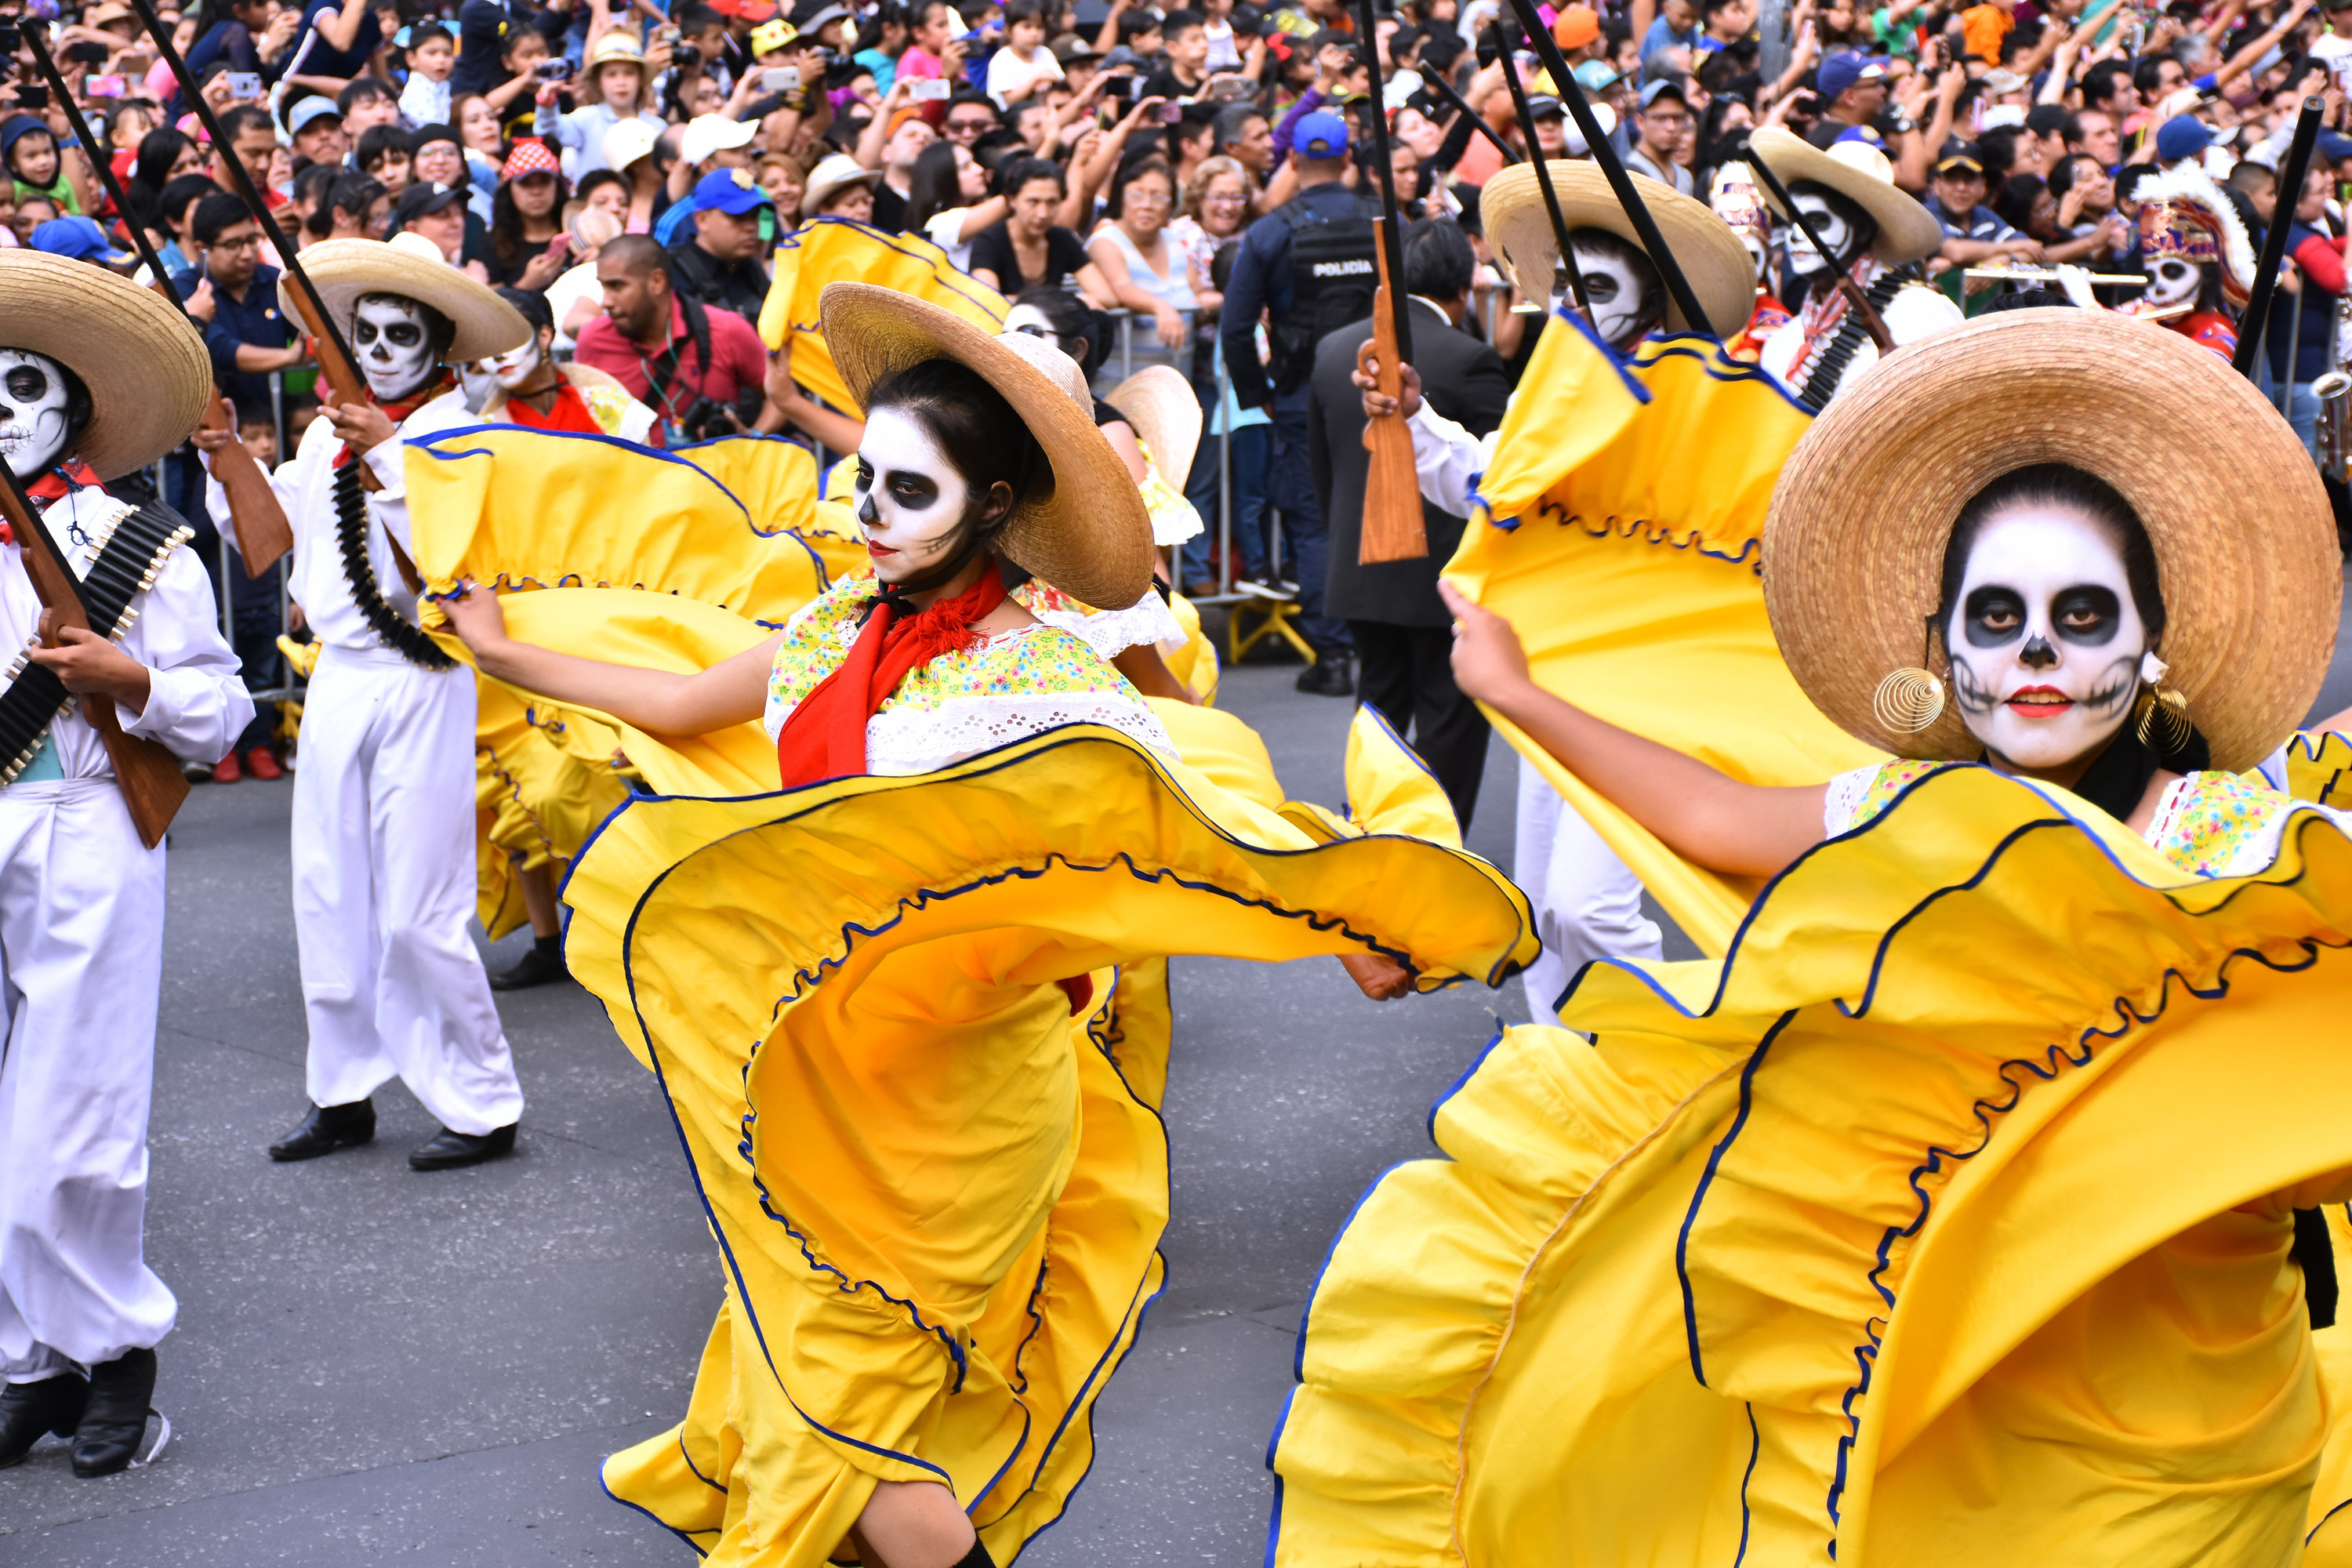 People wearing skull paint and bright yellow costumes holding guns in the air